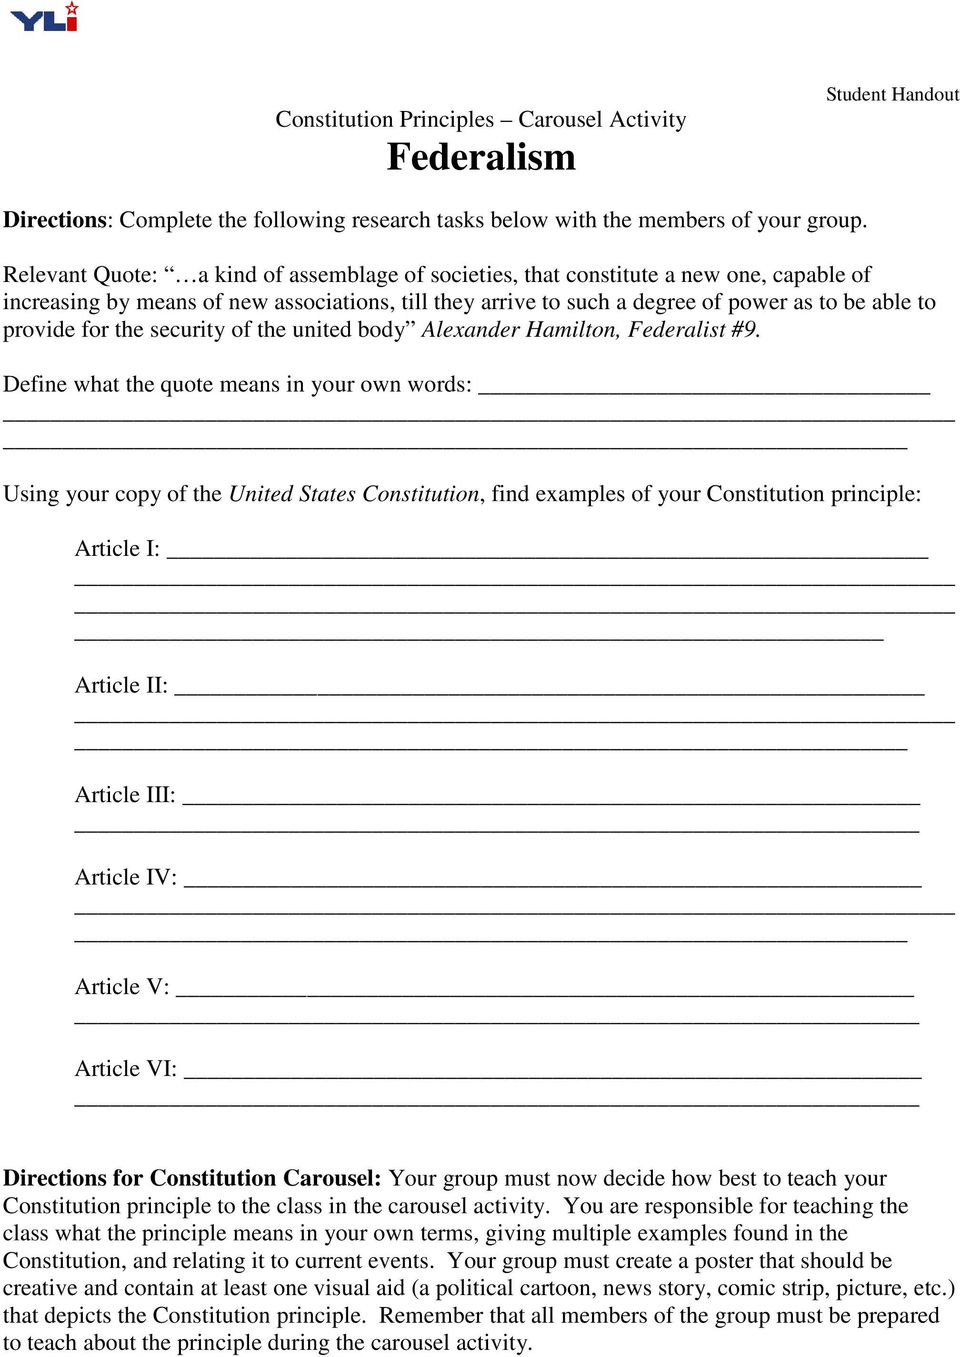 Four Key Constitutional Principles - PDF Free Download Regarding Constitutional Principles Worksheet Answers